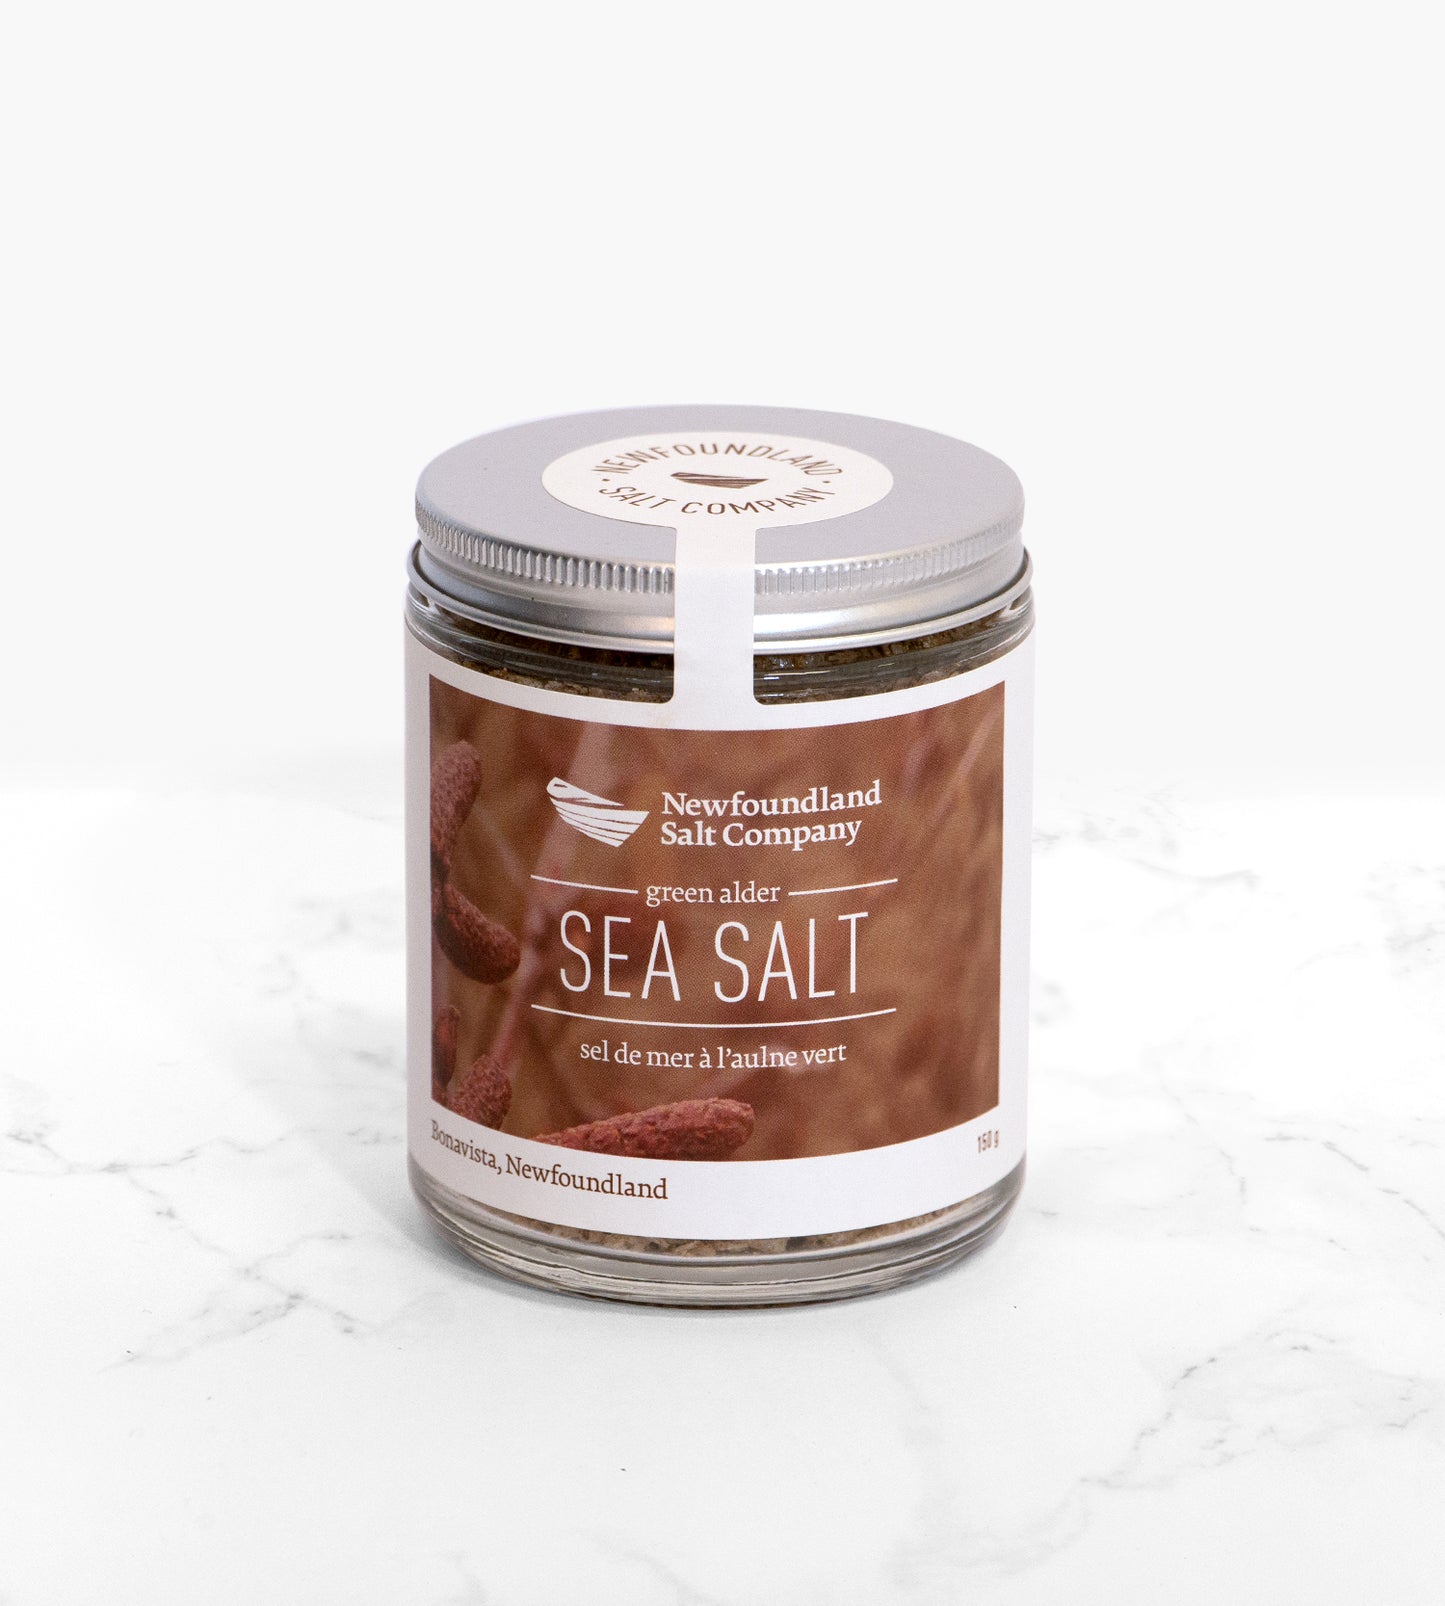 A cylindrical glass jar of sea salt flavoured with green alder, on a white marble tile. The label features a textural brown photo of alder cones.